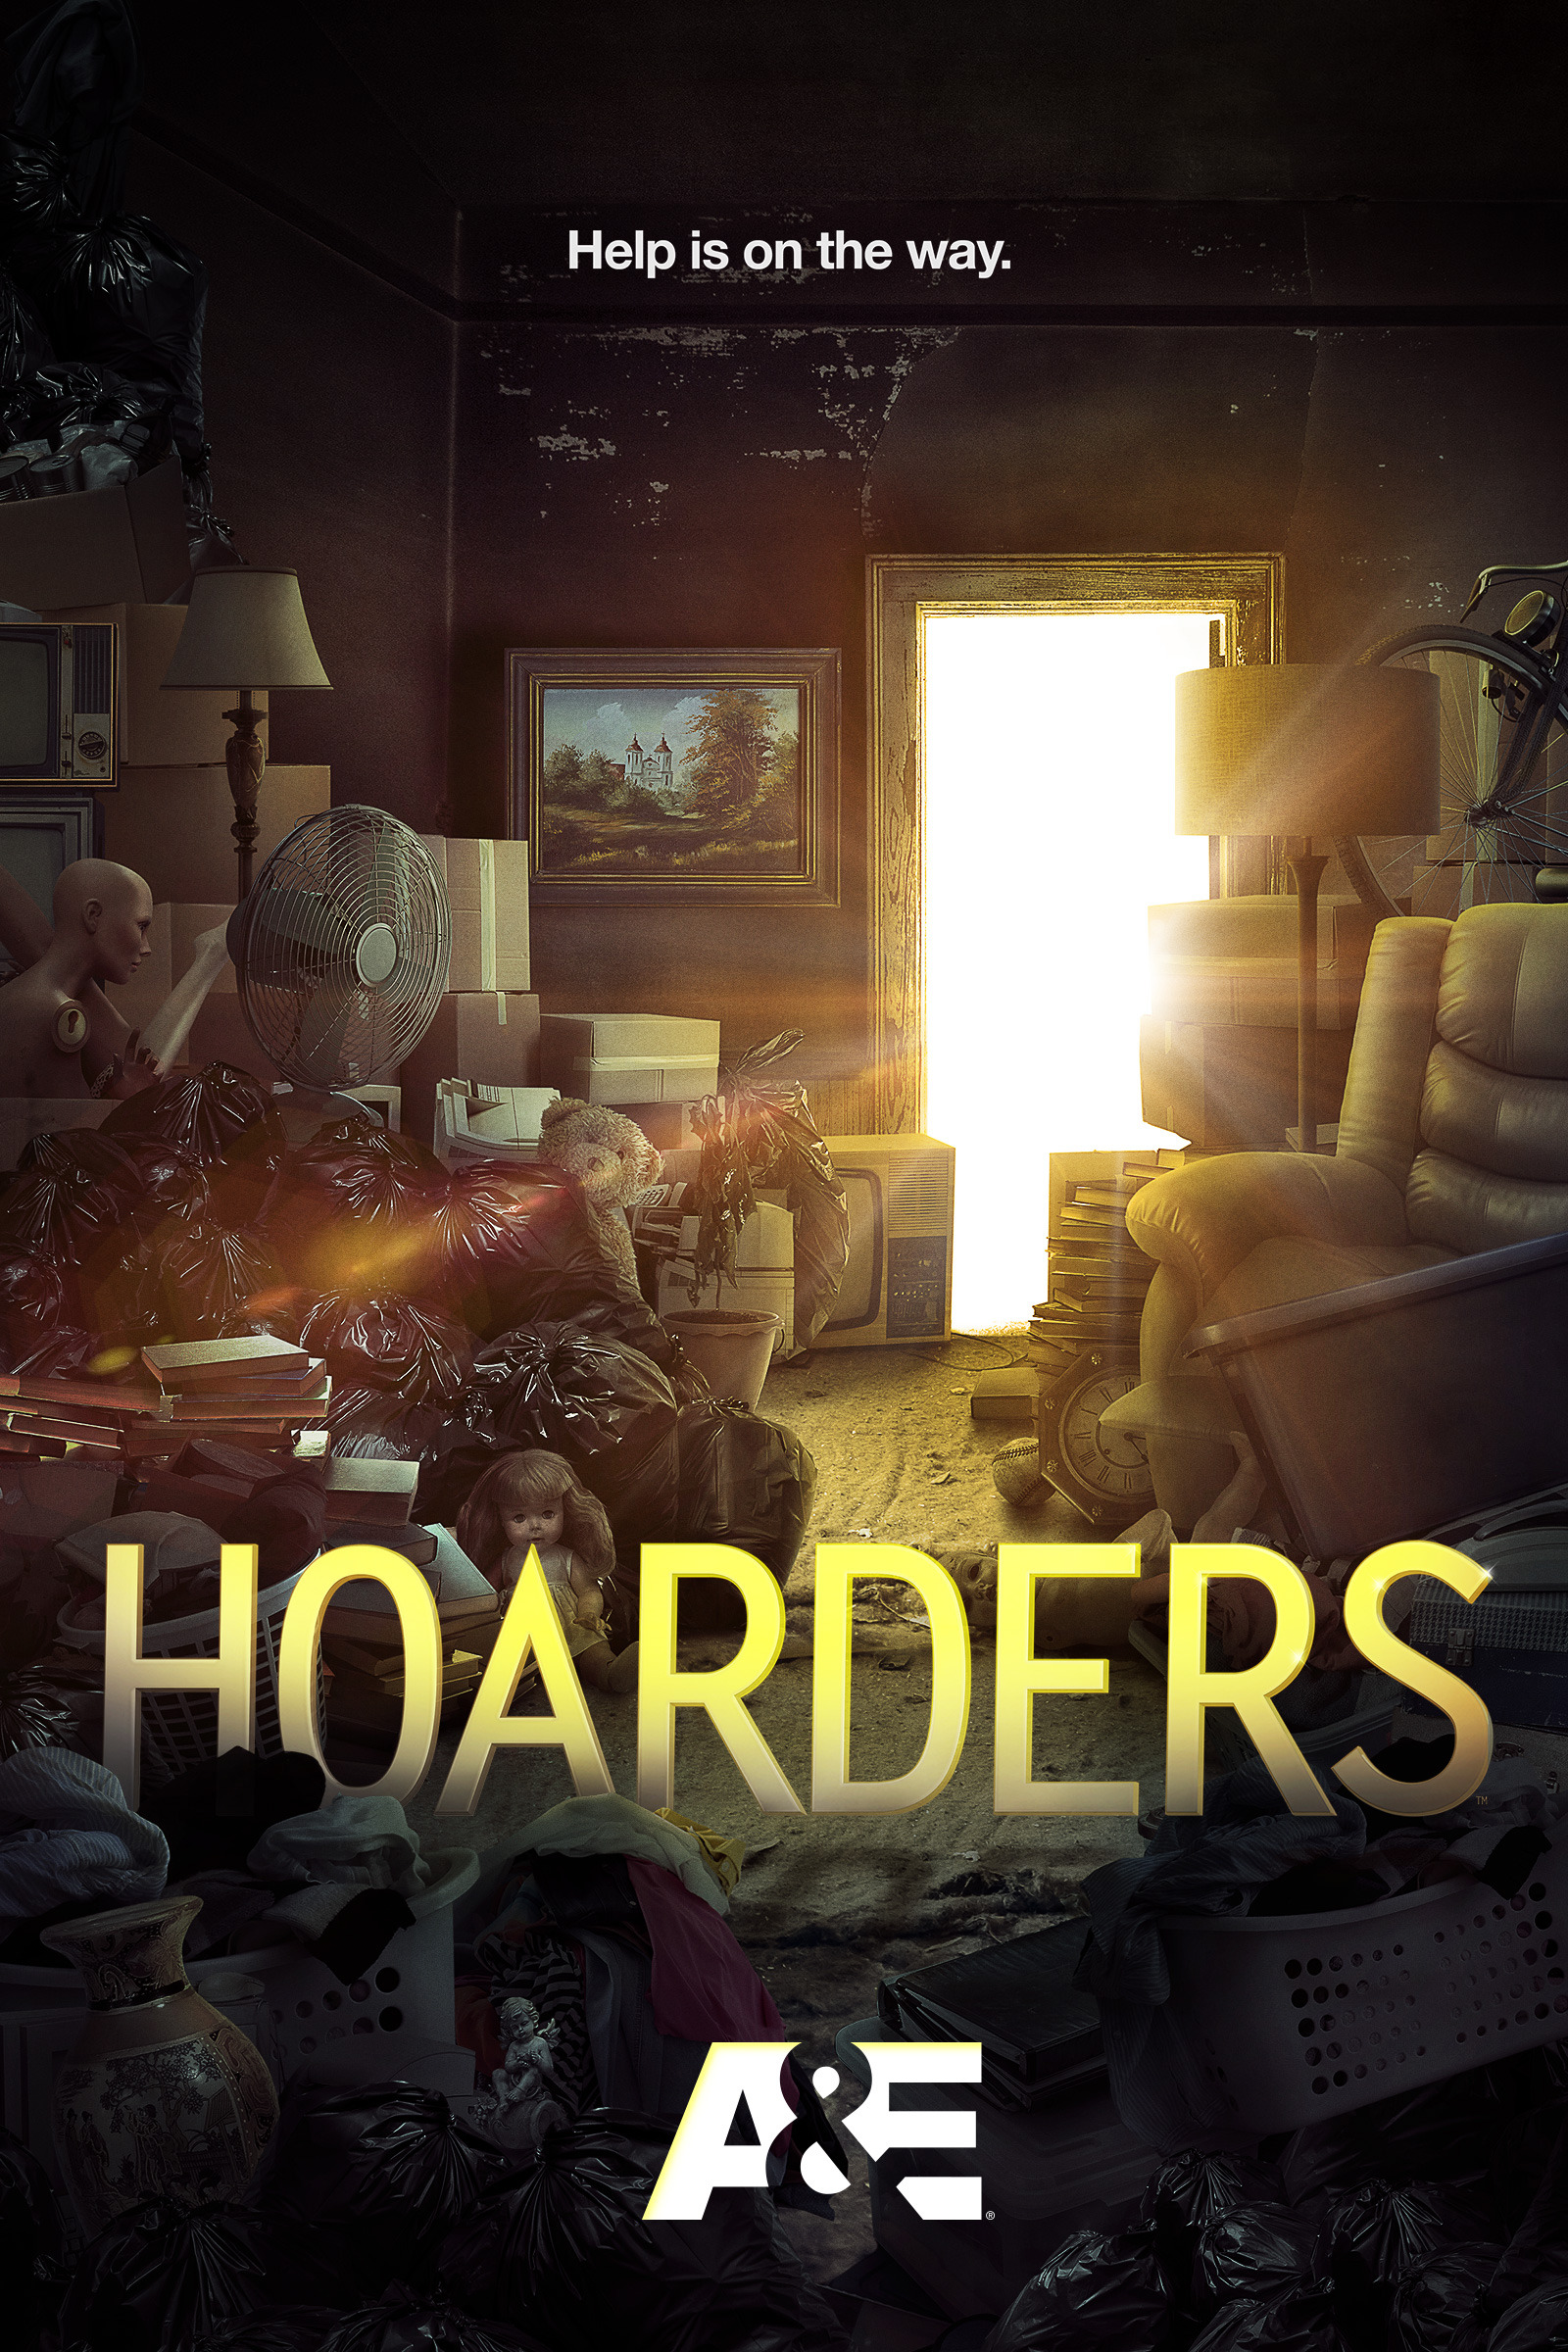 Mega Sized Movie Poster Image for Hoarders (#5 of 5)